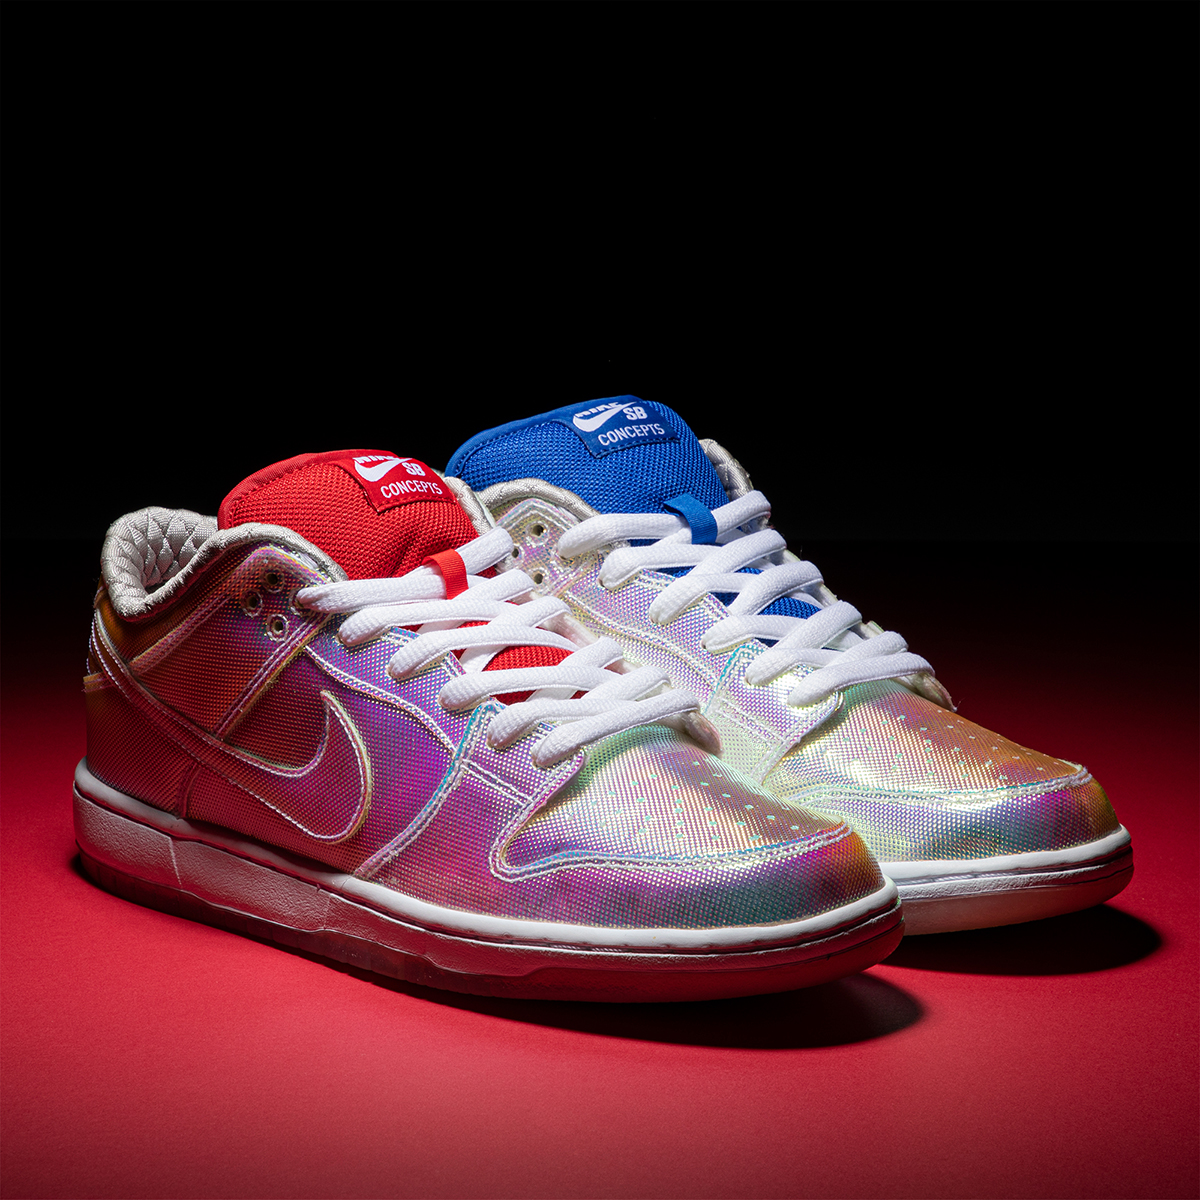 Concepts Its SB "Holy Grail" Pack